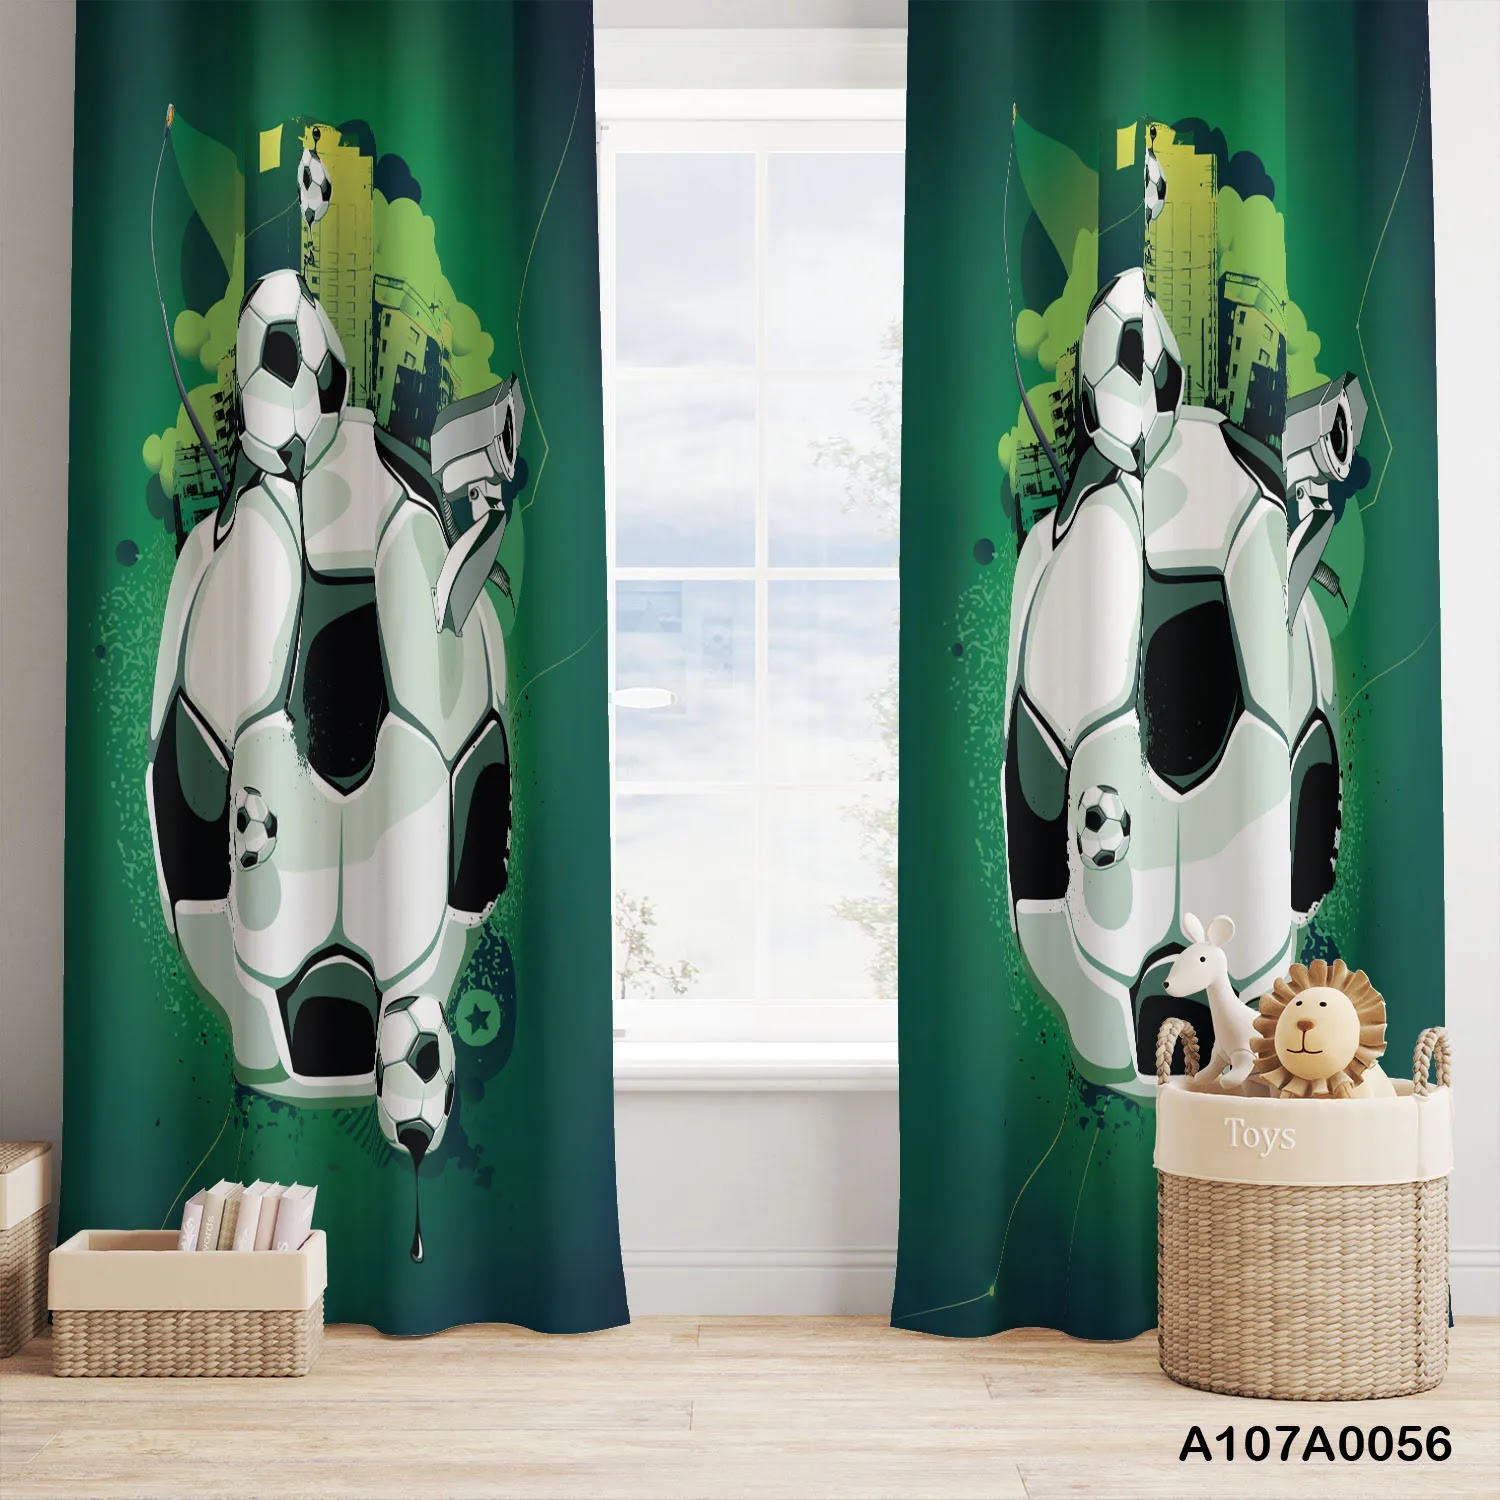 Football with green color curtains for boys room